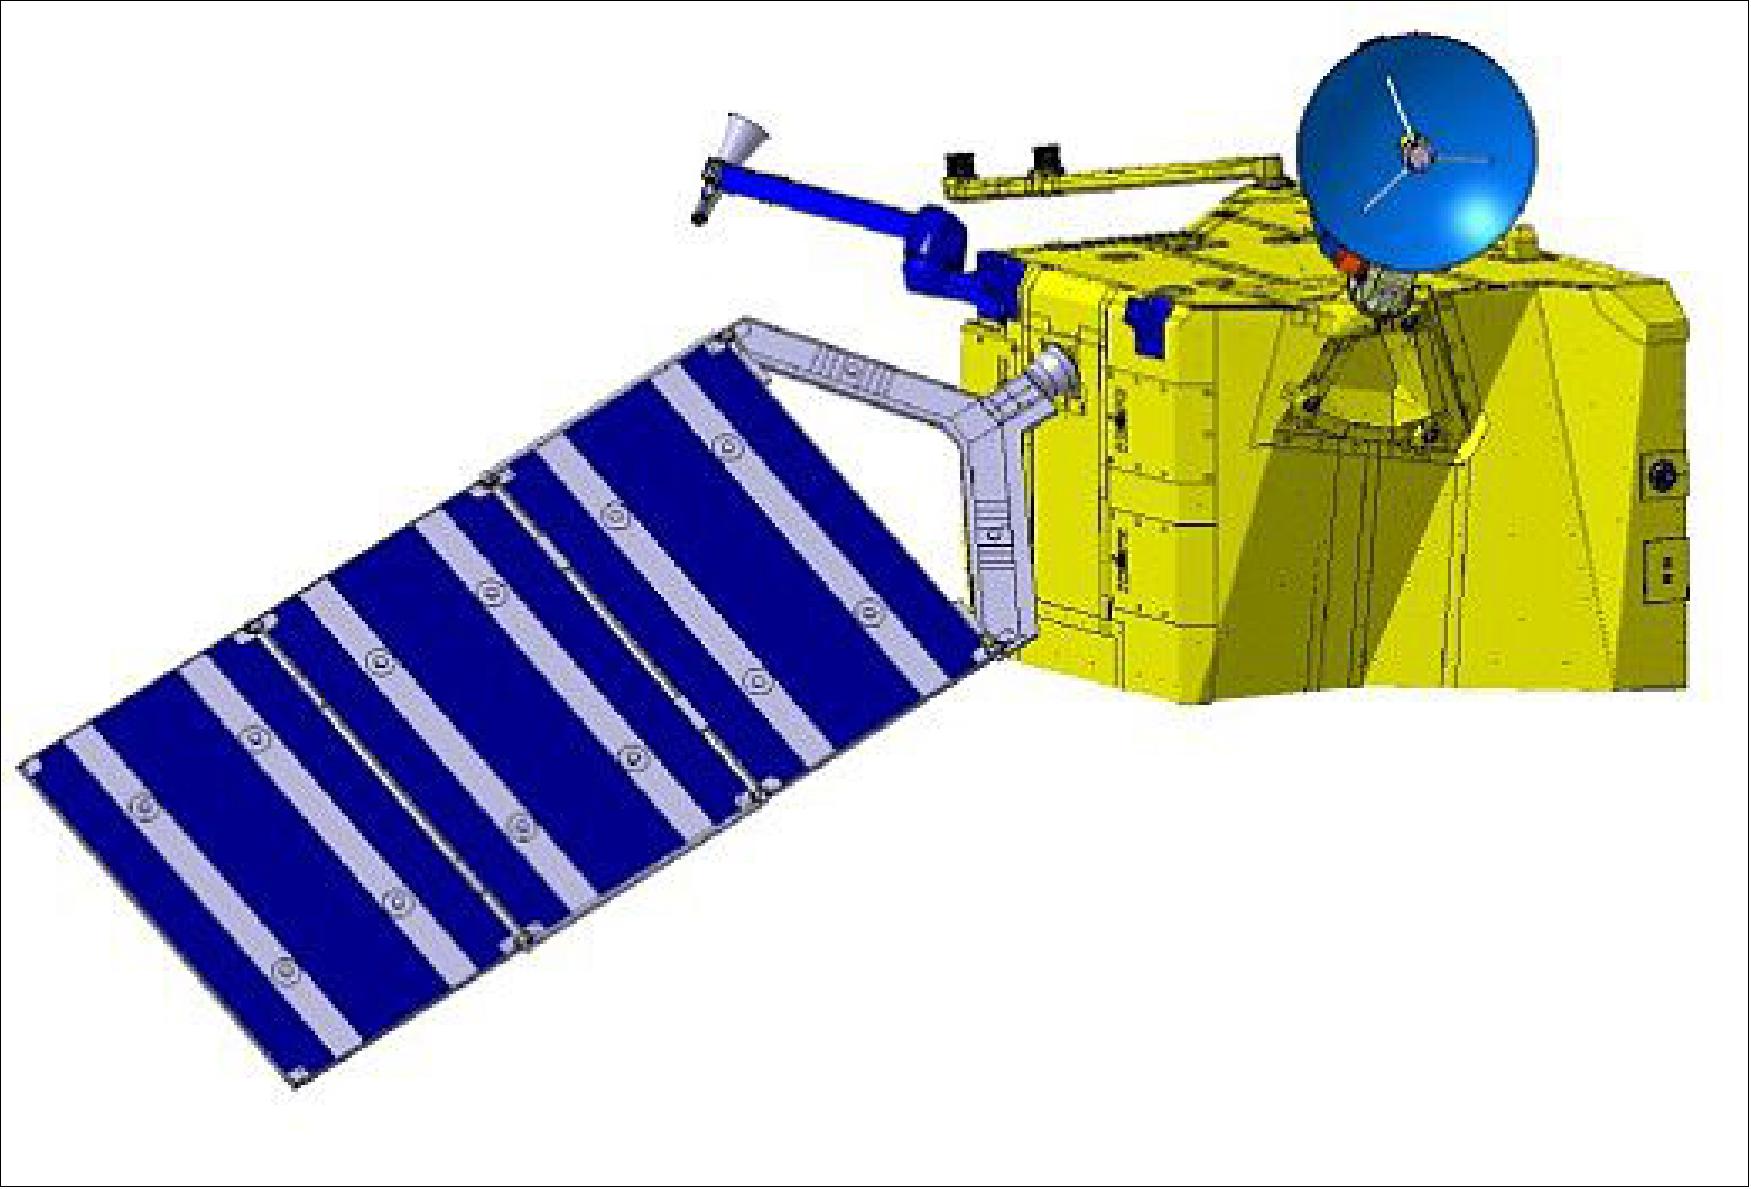 Figure 8: MPO spacecraft in deployed configuration (image credit: Airbus DS)